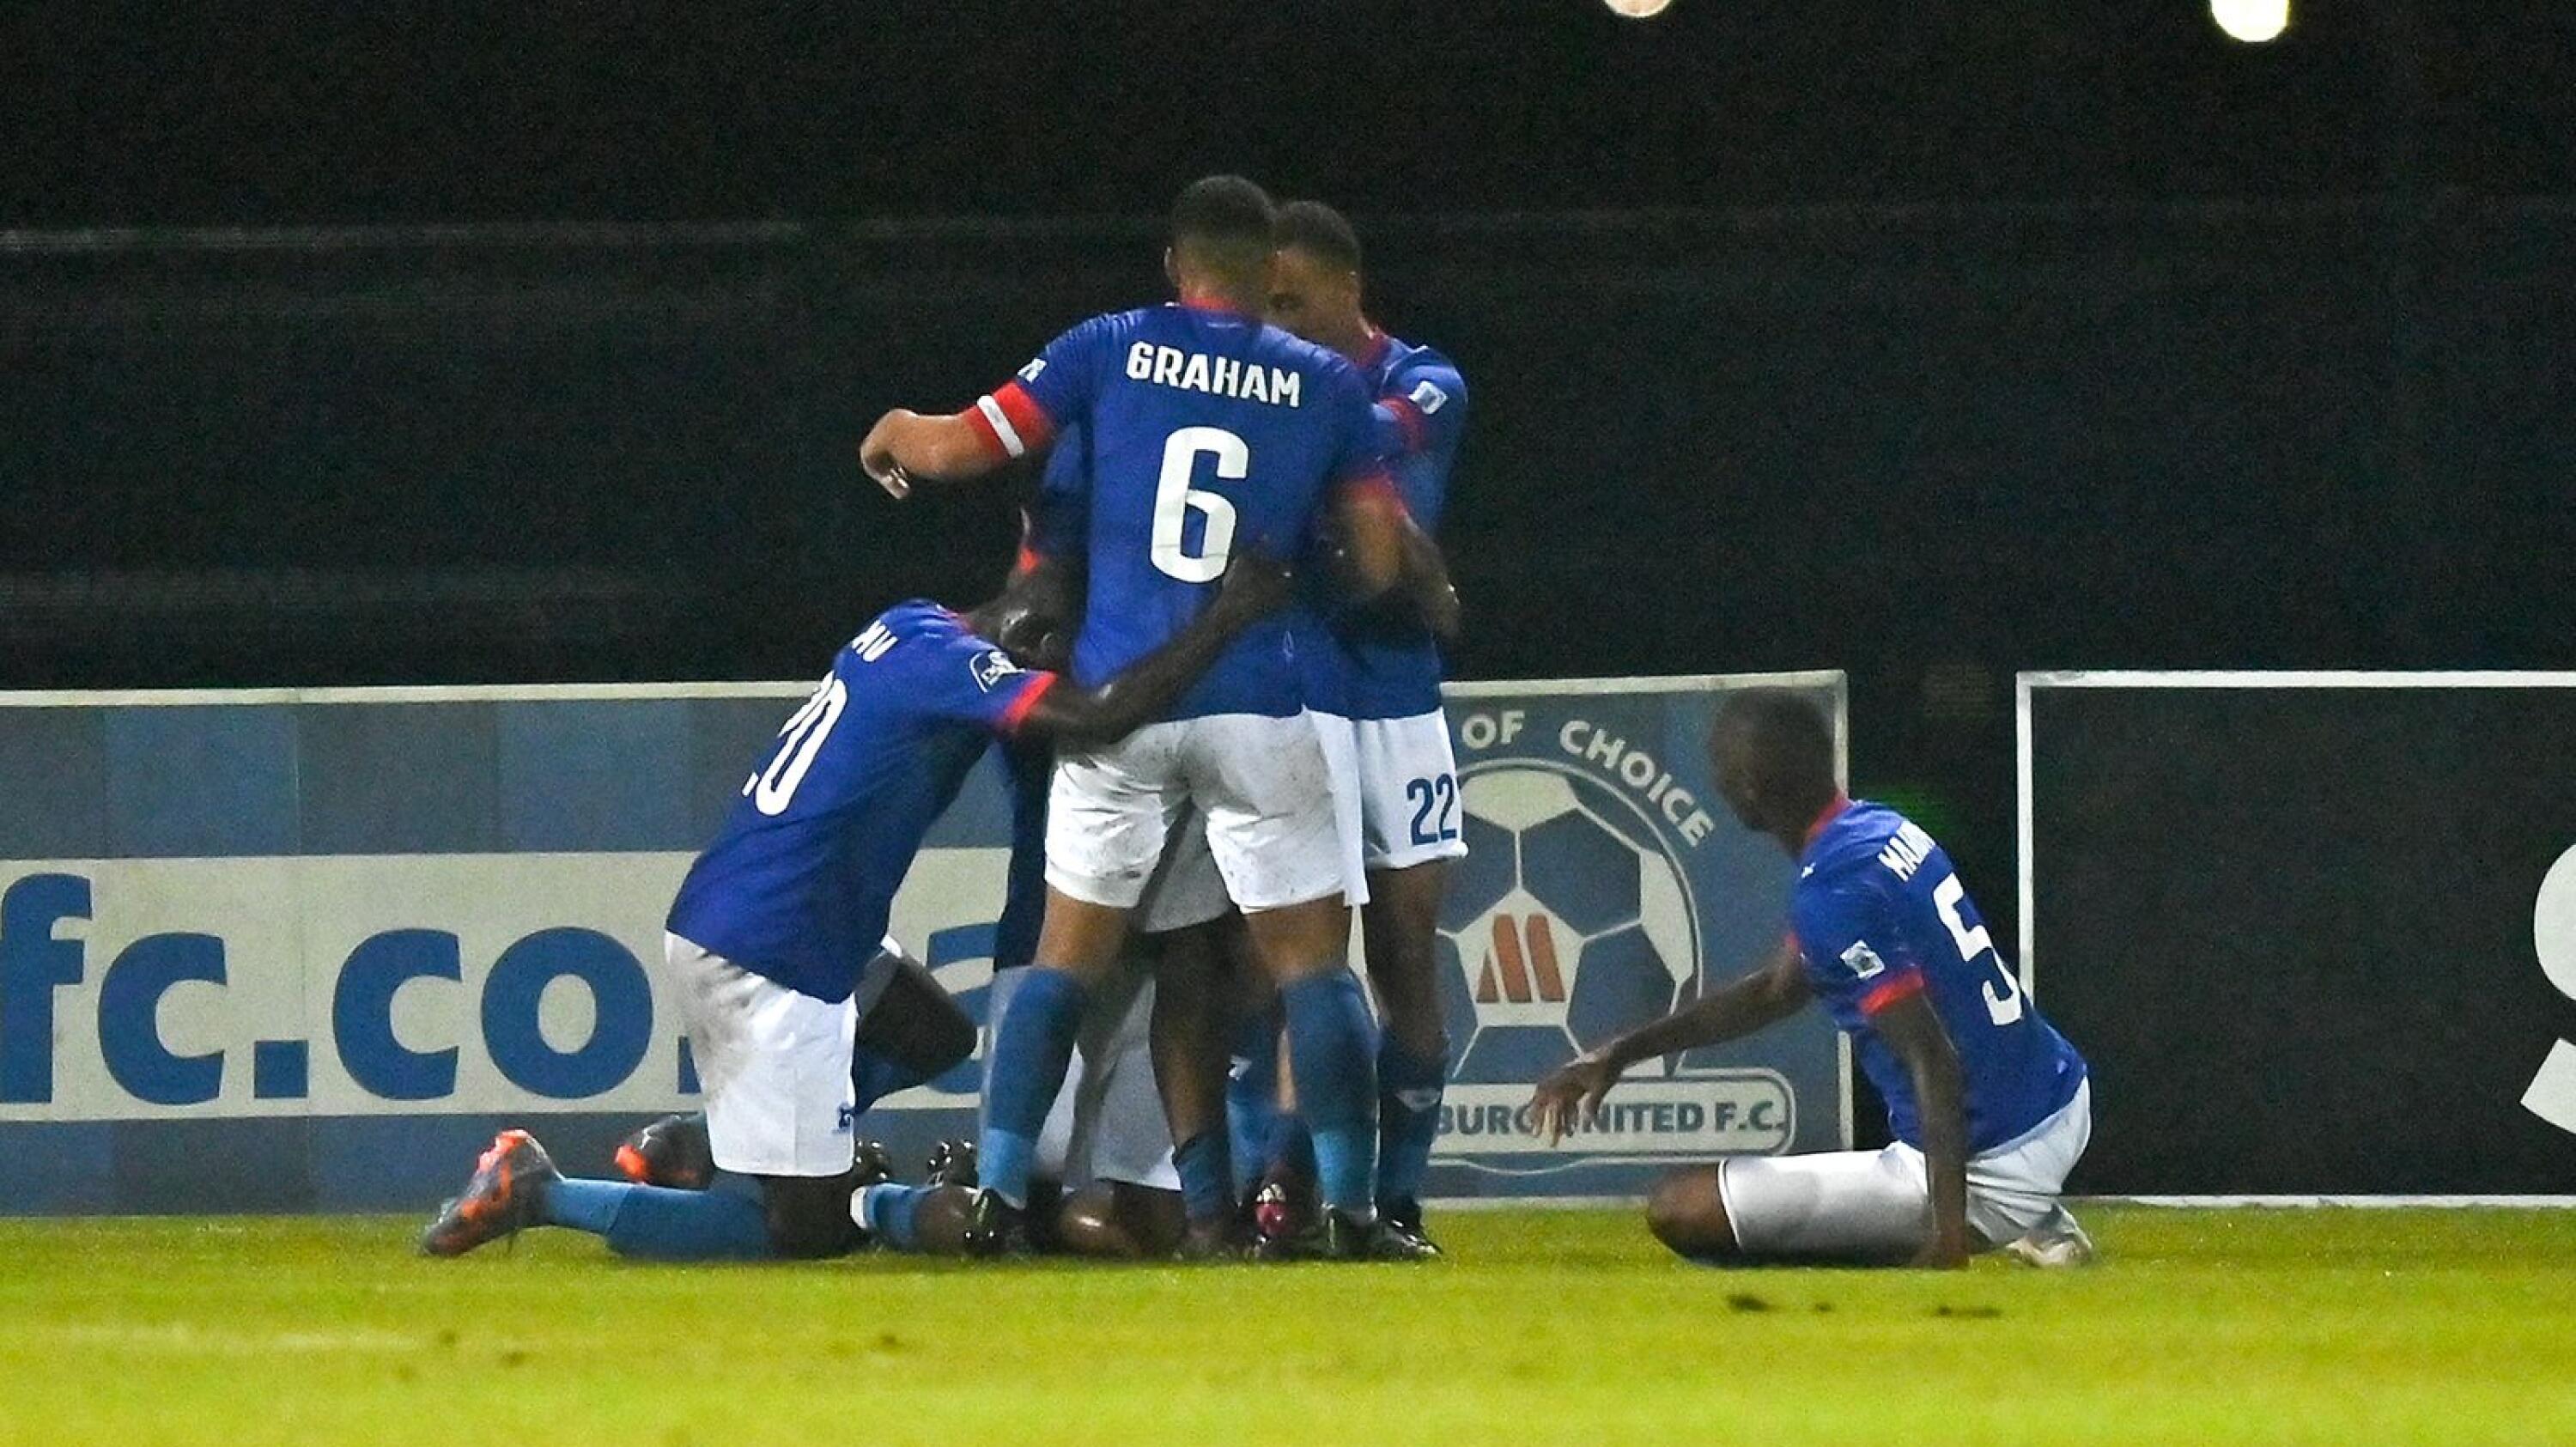 Maritzburg United players celebrate Rowan Human’s goal during their promotion/play-off game against Casric Stars at Harry Gwala Stadium in Pietermaritzburg on Wednesday